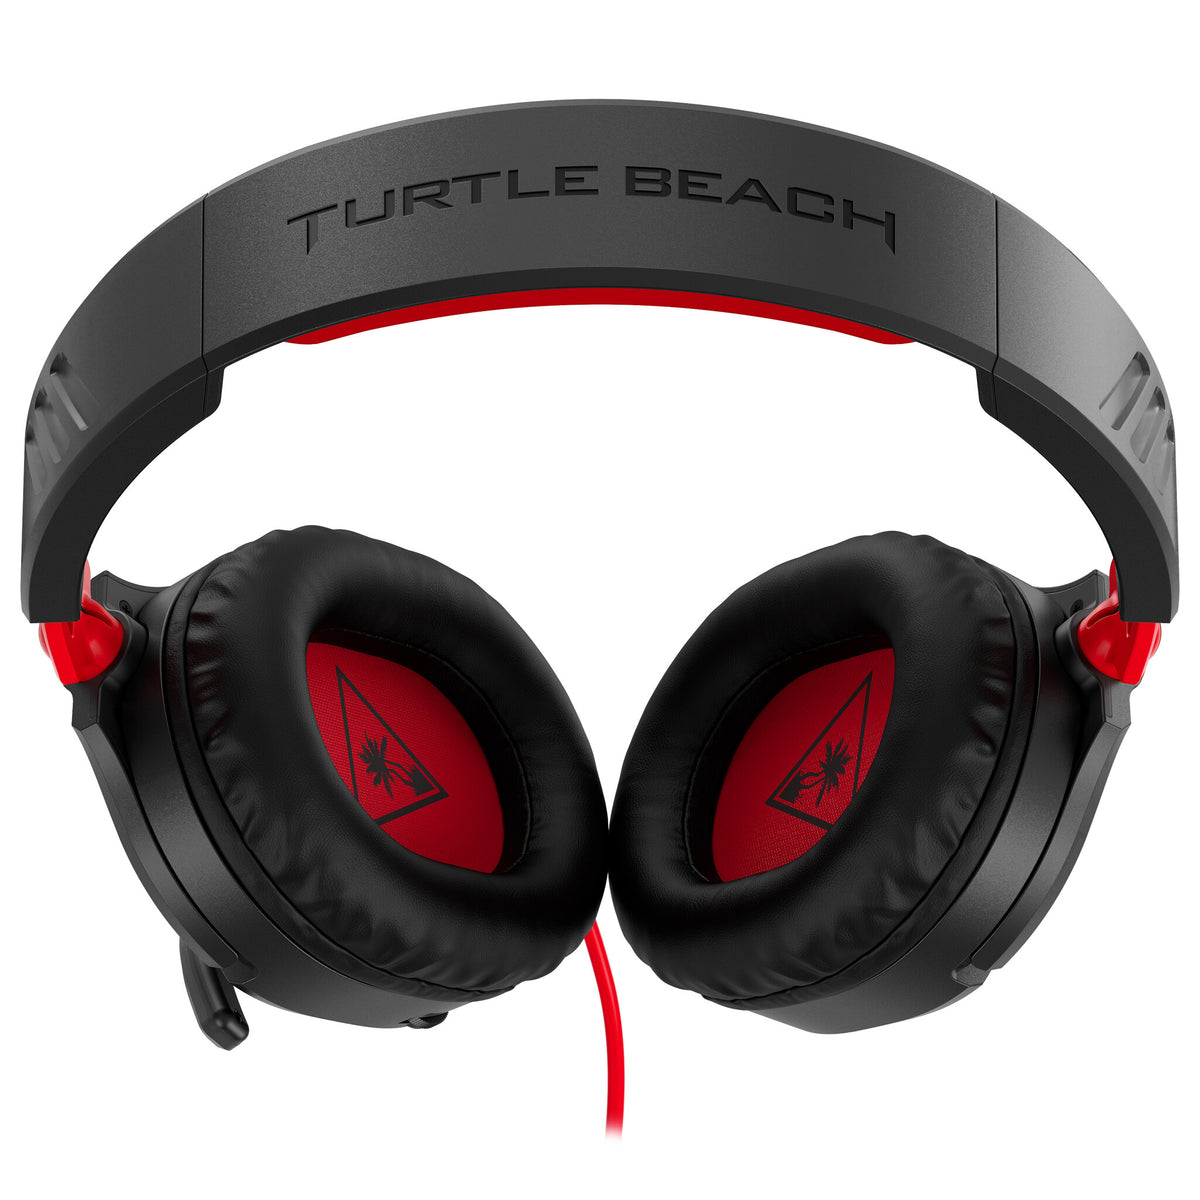 Turtle Beach Recon 70 - Wired Gaming Headset for Nintendo Switch in Black / Red